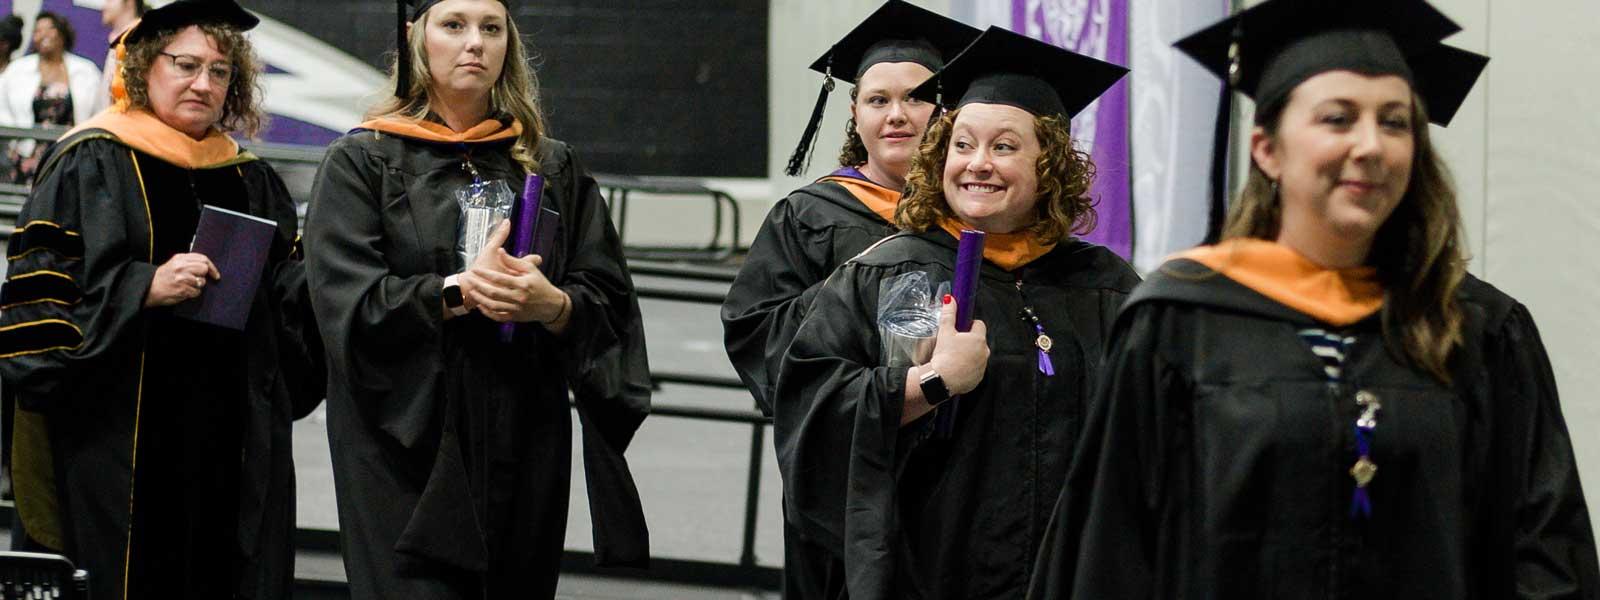 master of nursing graduates leave commencement carrying diplomas